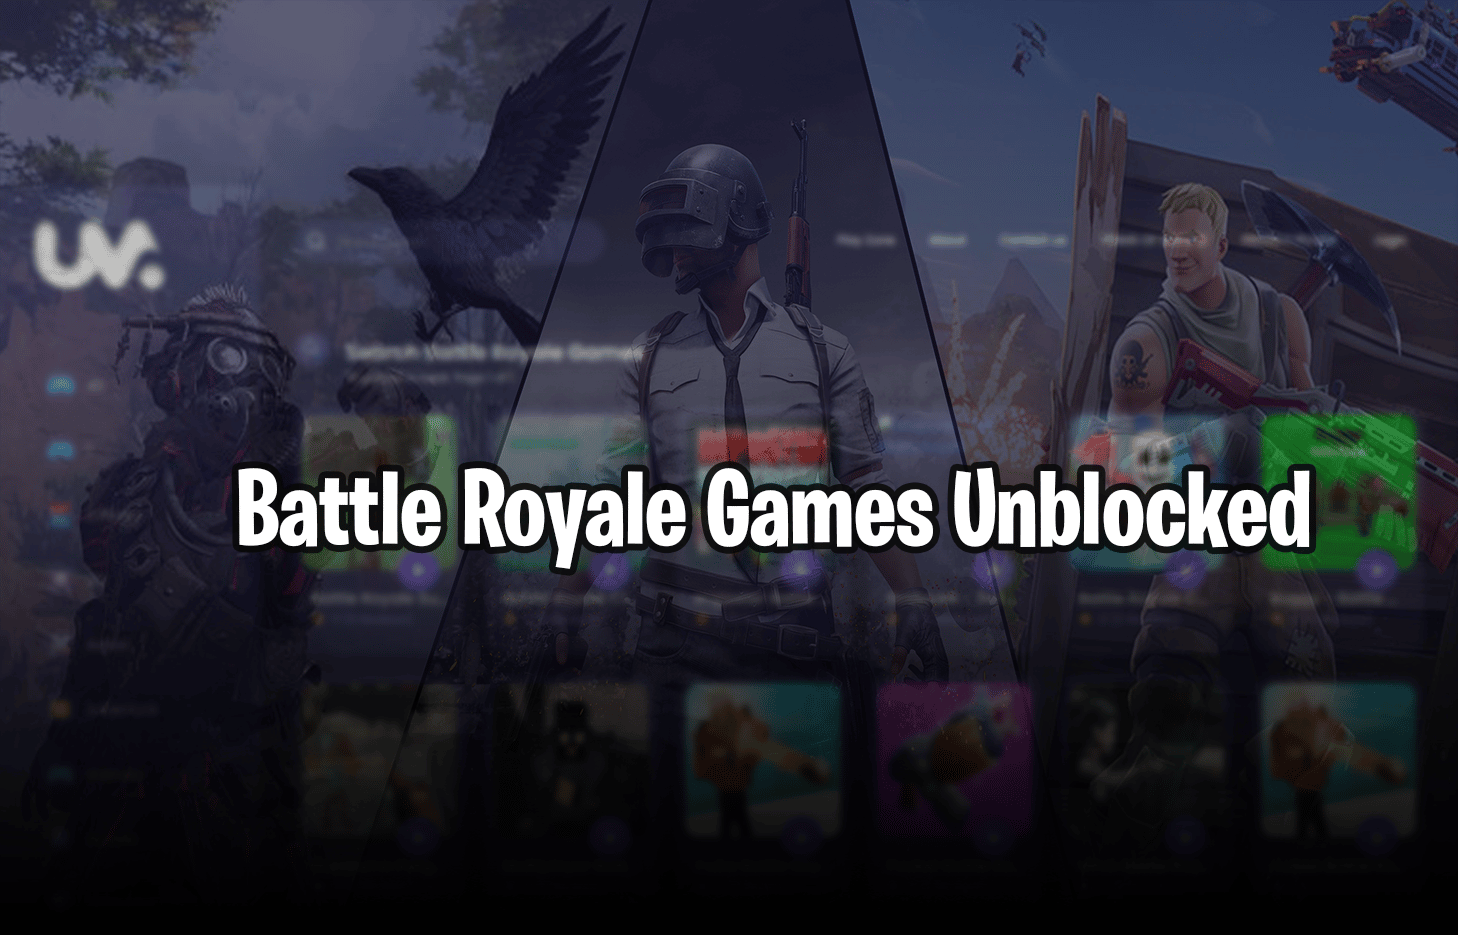 Battle Royale Games Unblocked | How to Play Your Favorite Games at School or Work